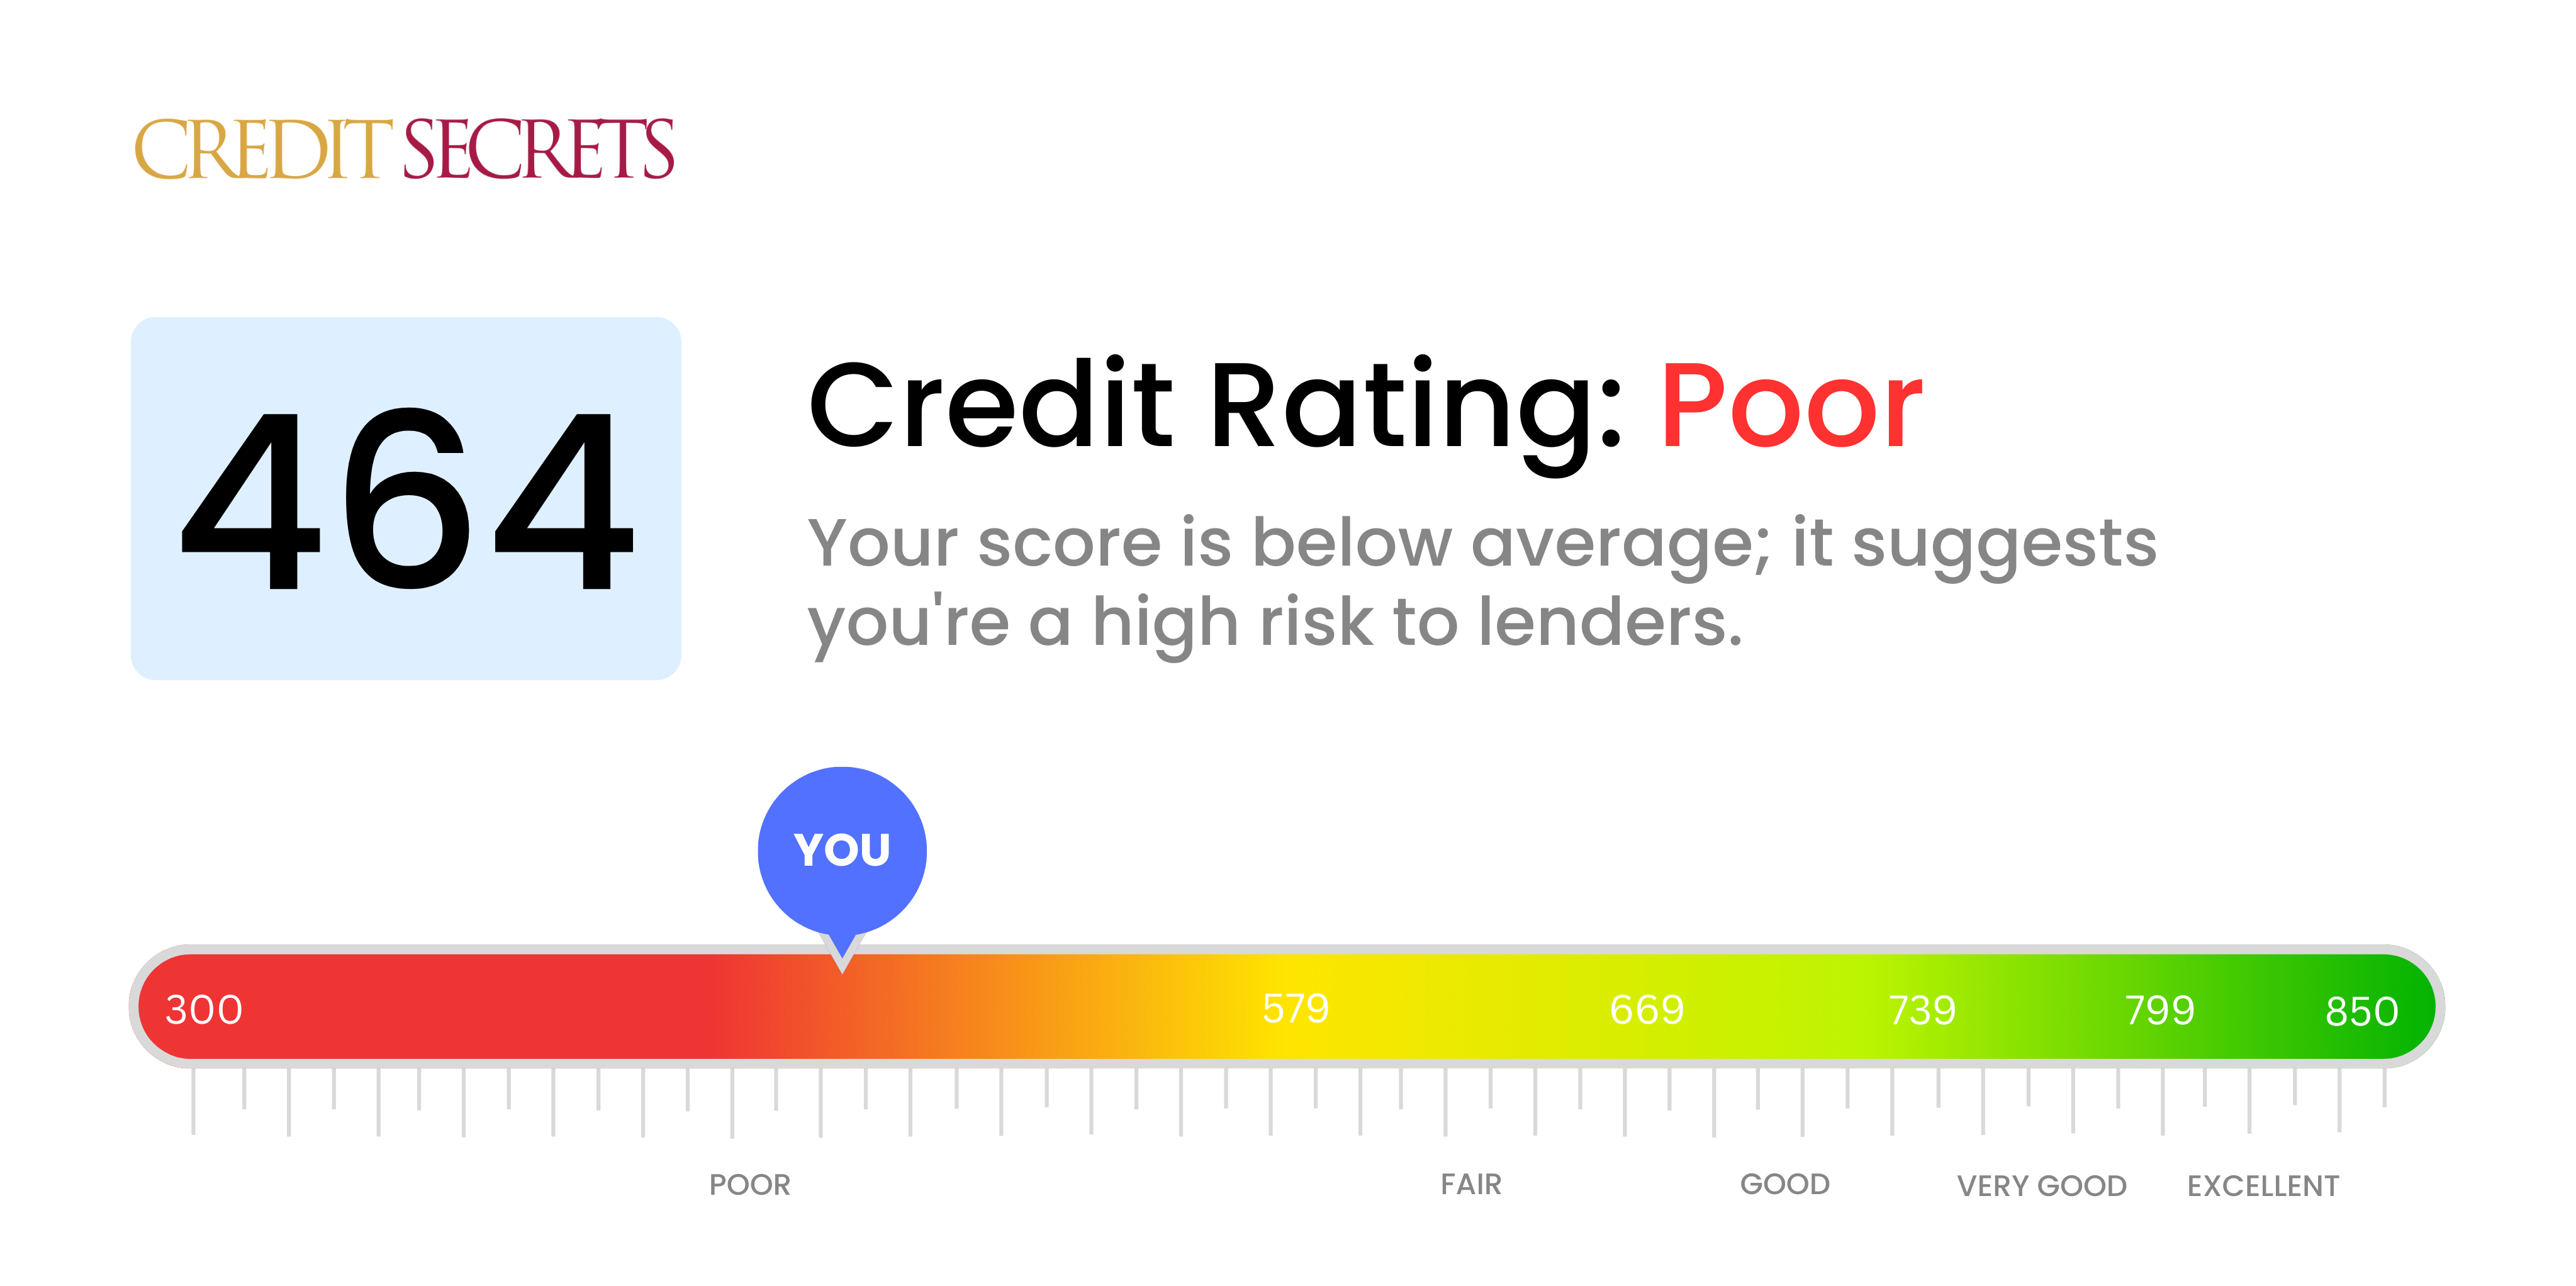 Is 464 a good credit score?